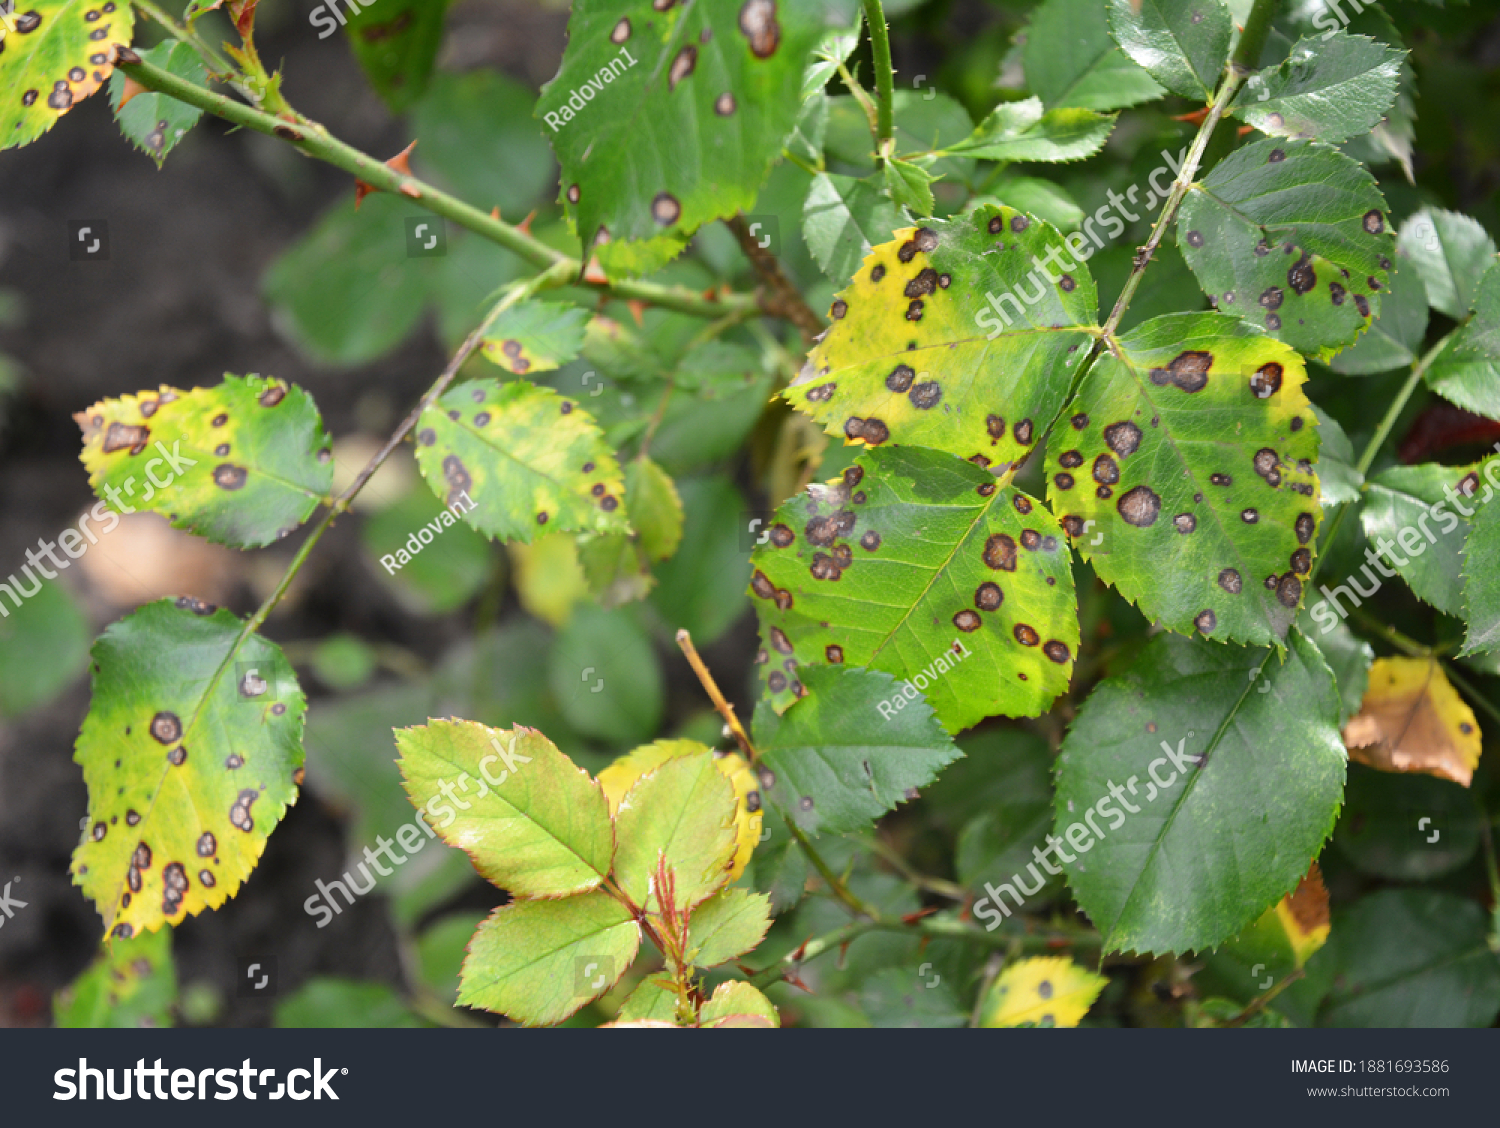 A close up on a fungal rose disease black spot with infected yellow and green leaves which weakens the rose bush, and needs treatment. #1881693586